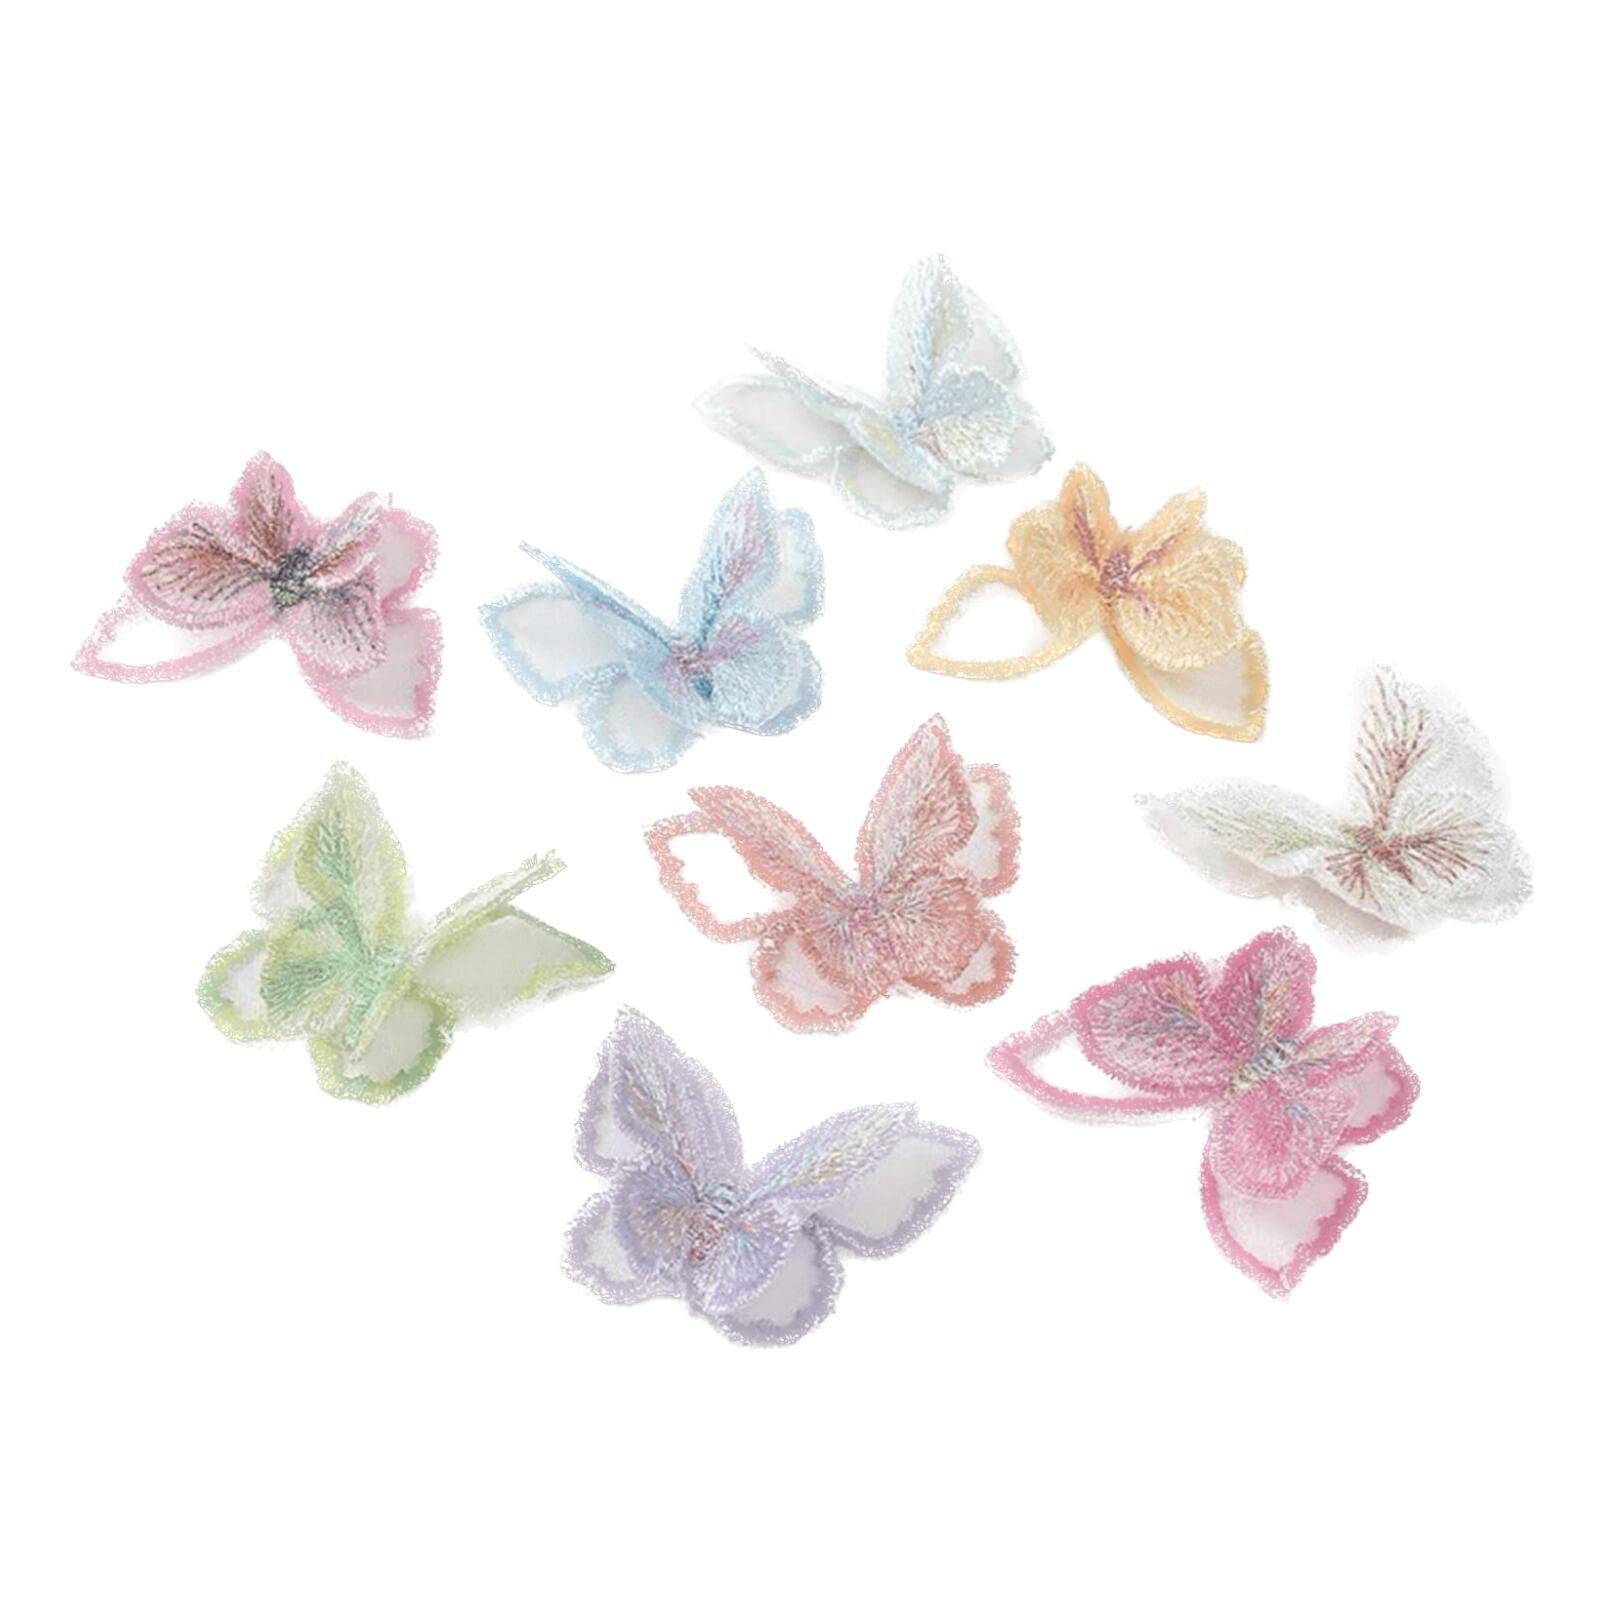 10PCS Butterfly Lace Applique Organza Embroidery Double Layers Butterfly  Patches Sewing for Craft Projects (Pale Blue)…